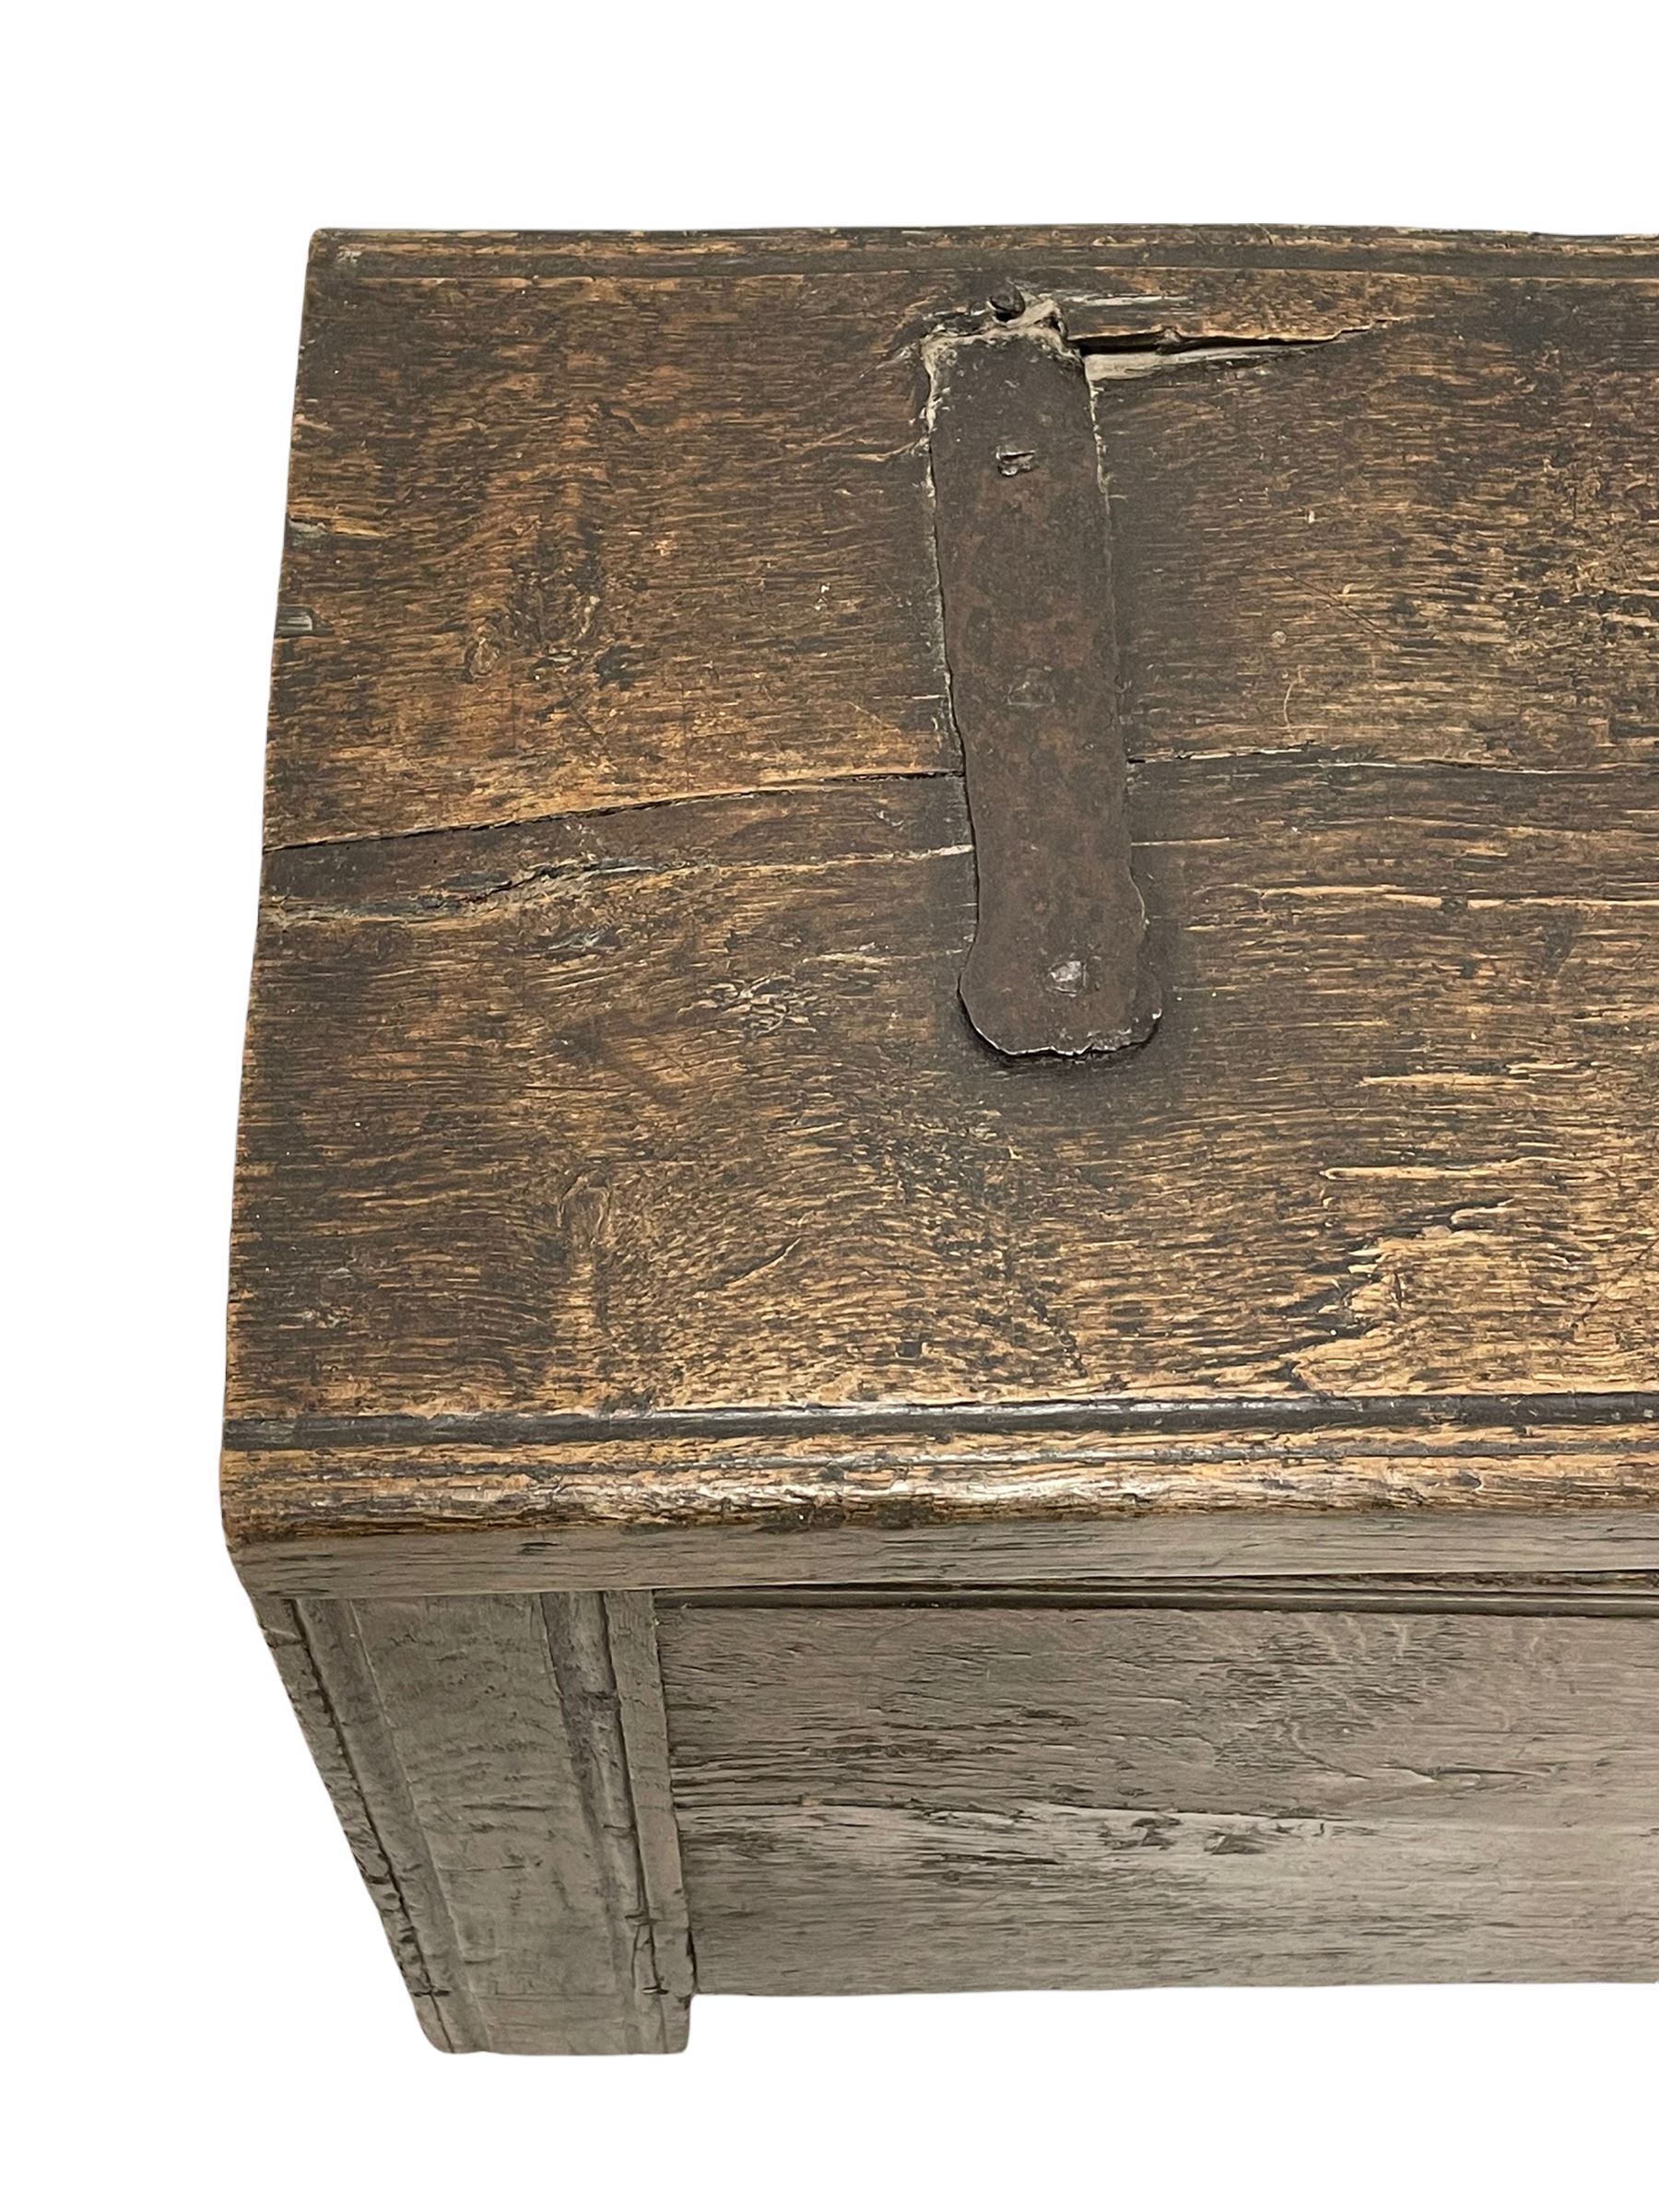 17th century and later plank oak chest - Image 8 of 12